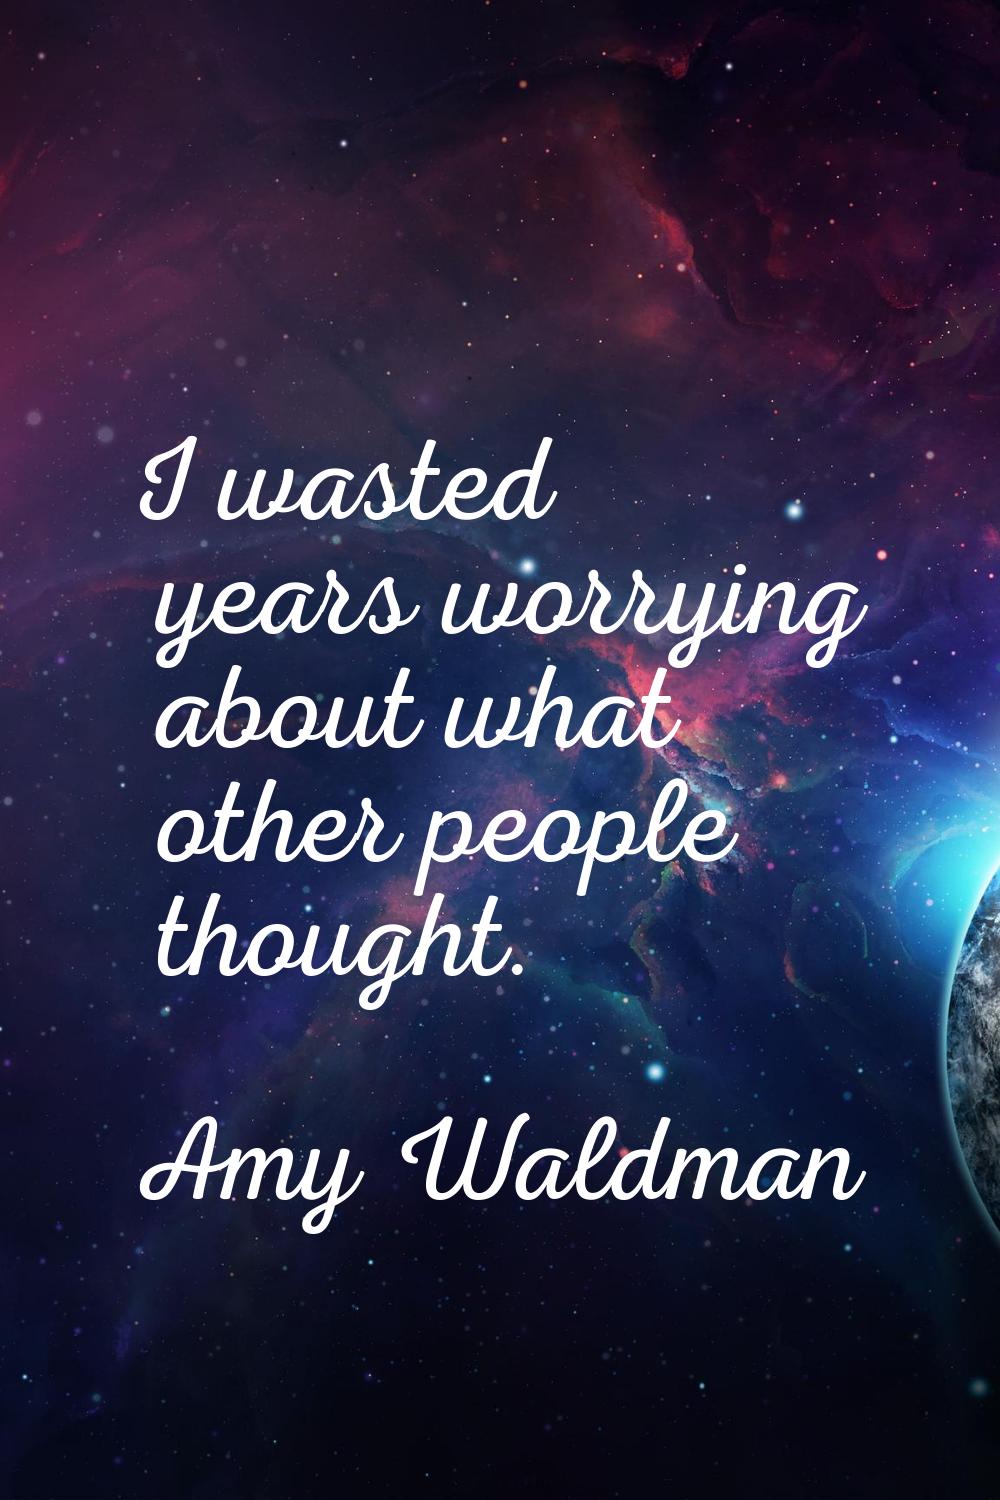 I wasted years worrying about what other people thought.